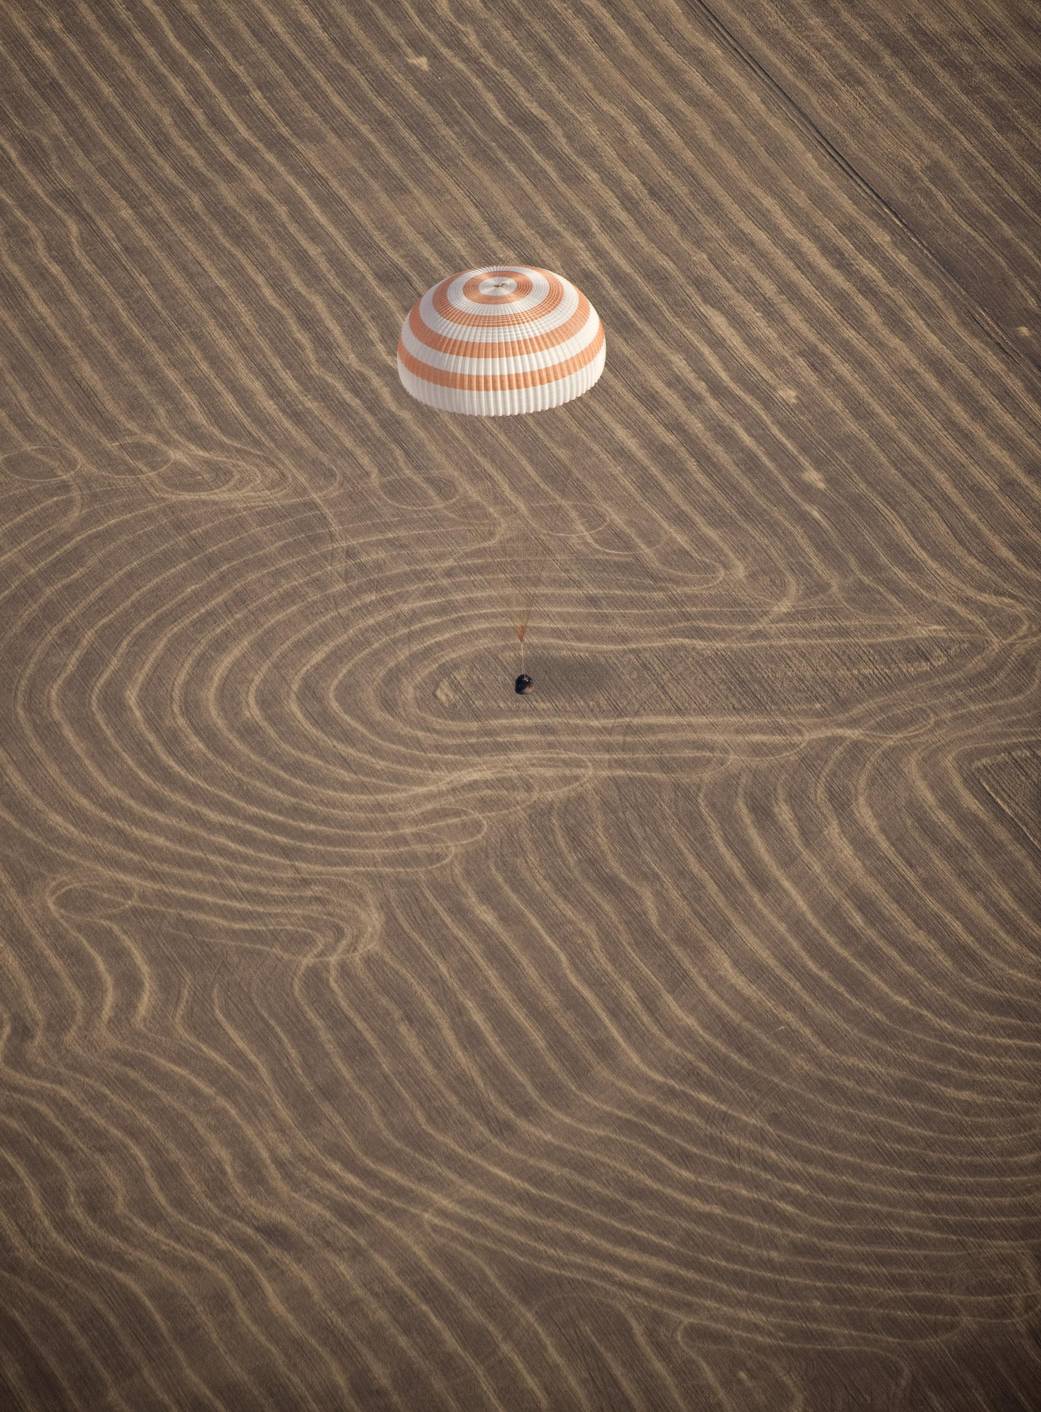 Spacecraft capsule descends toward field with red and white parachute above